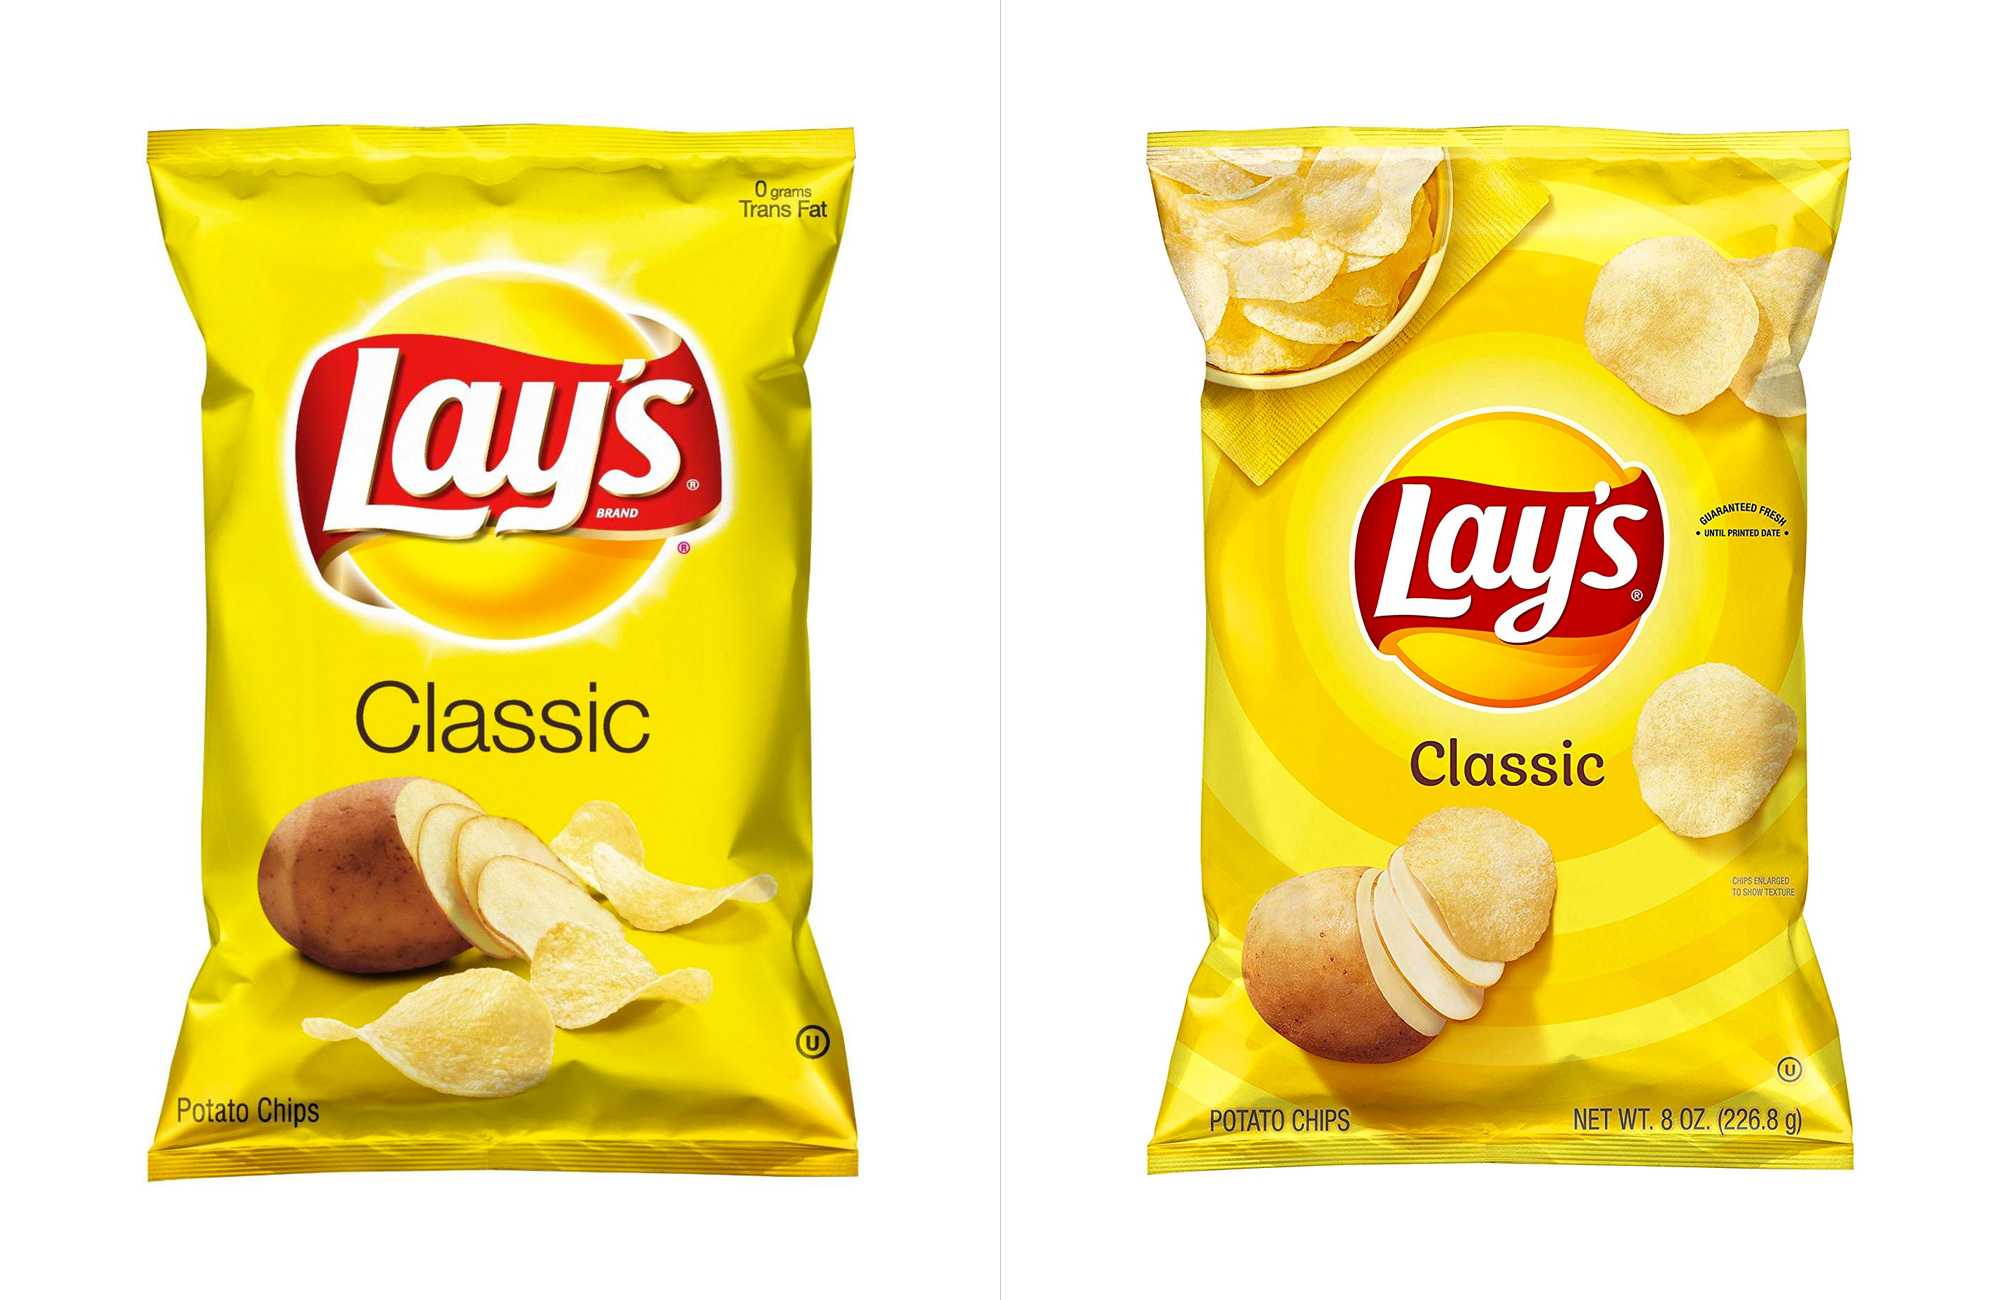 New Logo and Packaging for Lay's